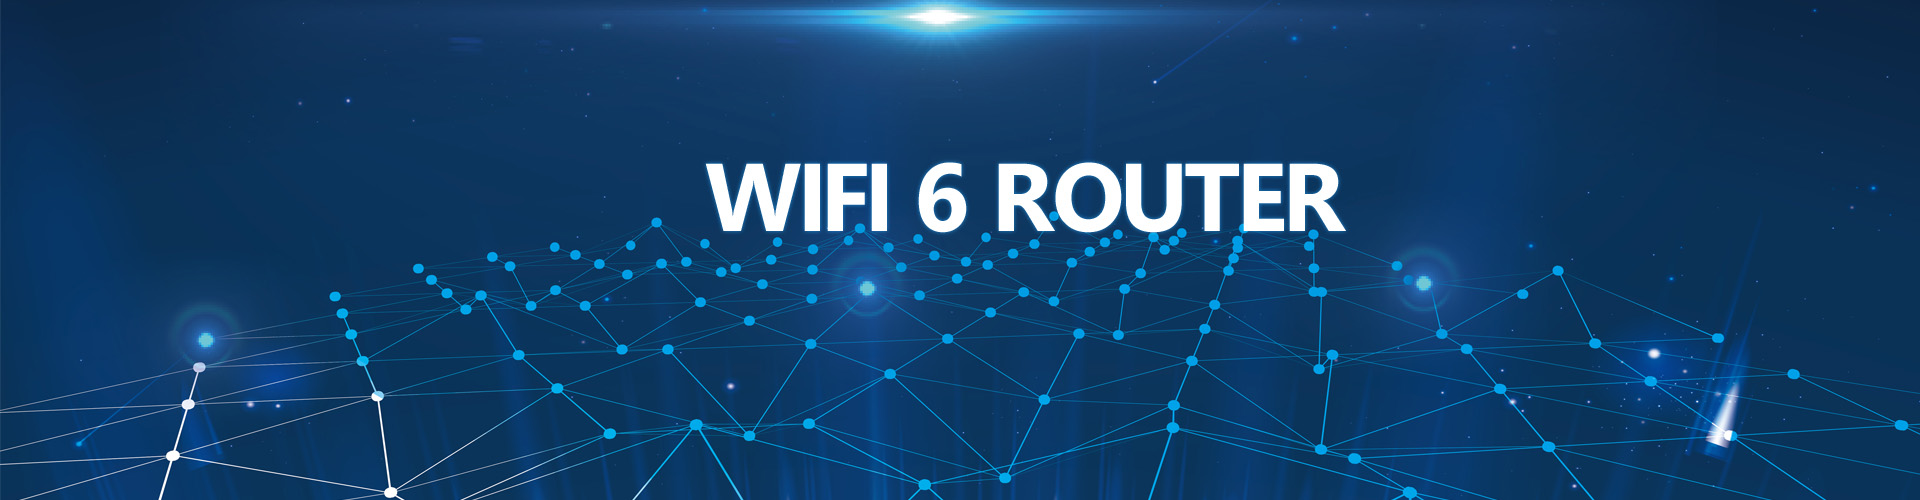 WIFI 6 ROUTER